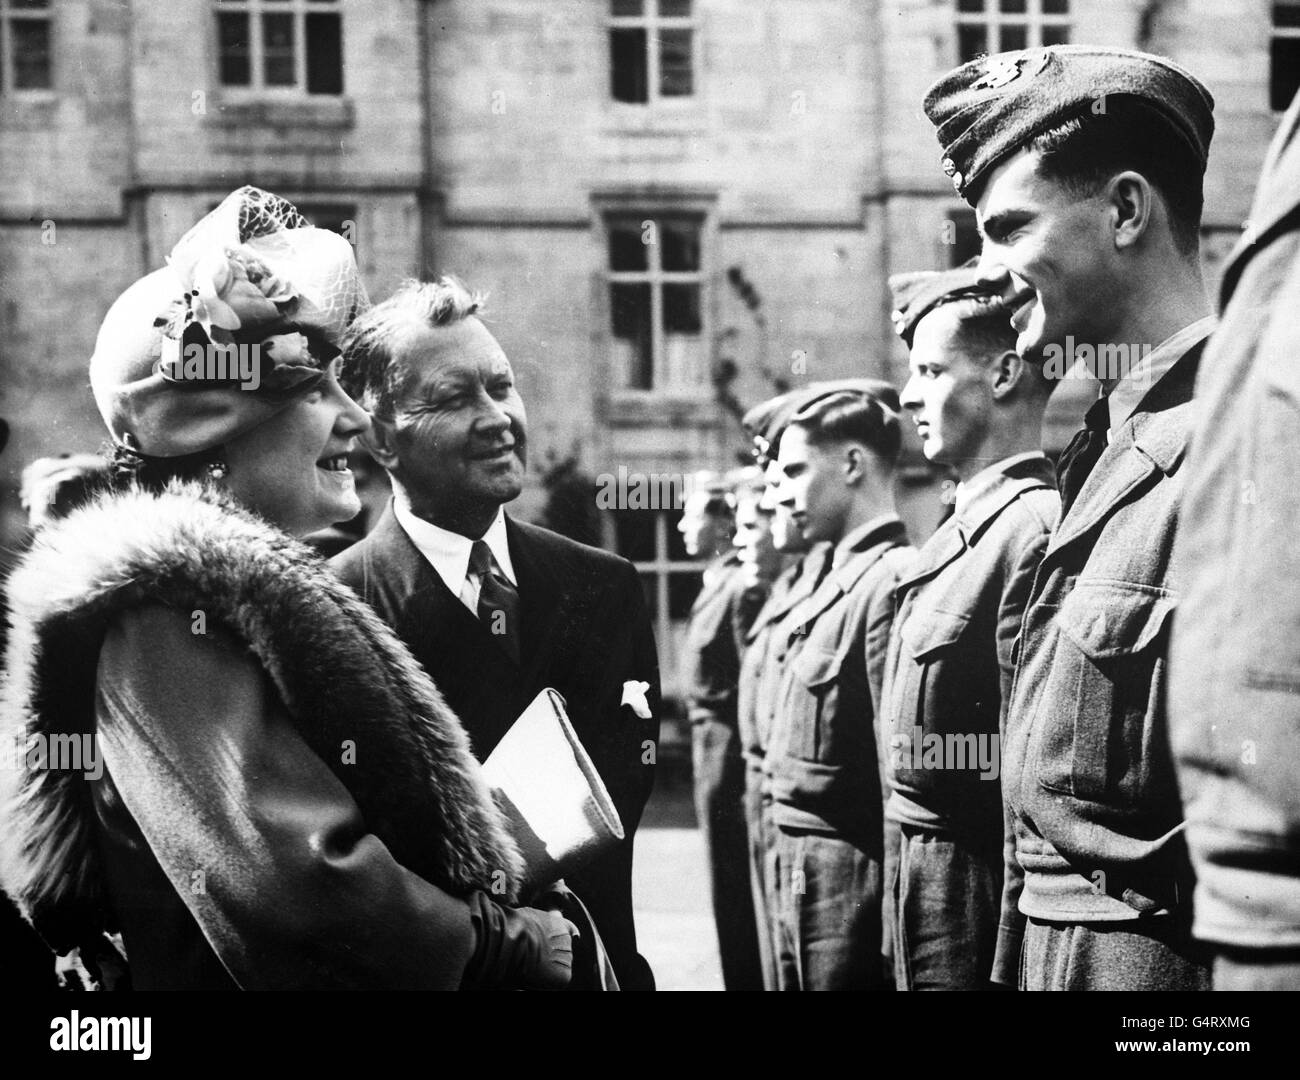 1950s royal air force Black and White Stock Photos & Images - Alamy